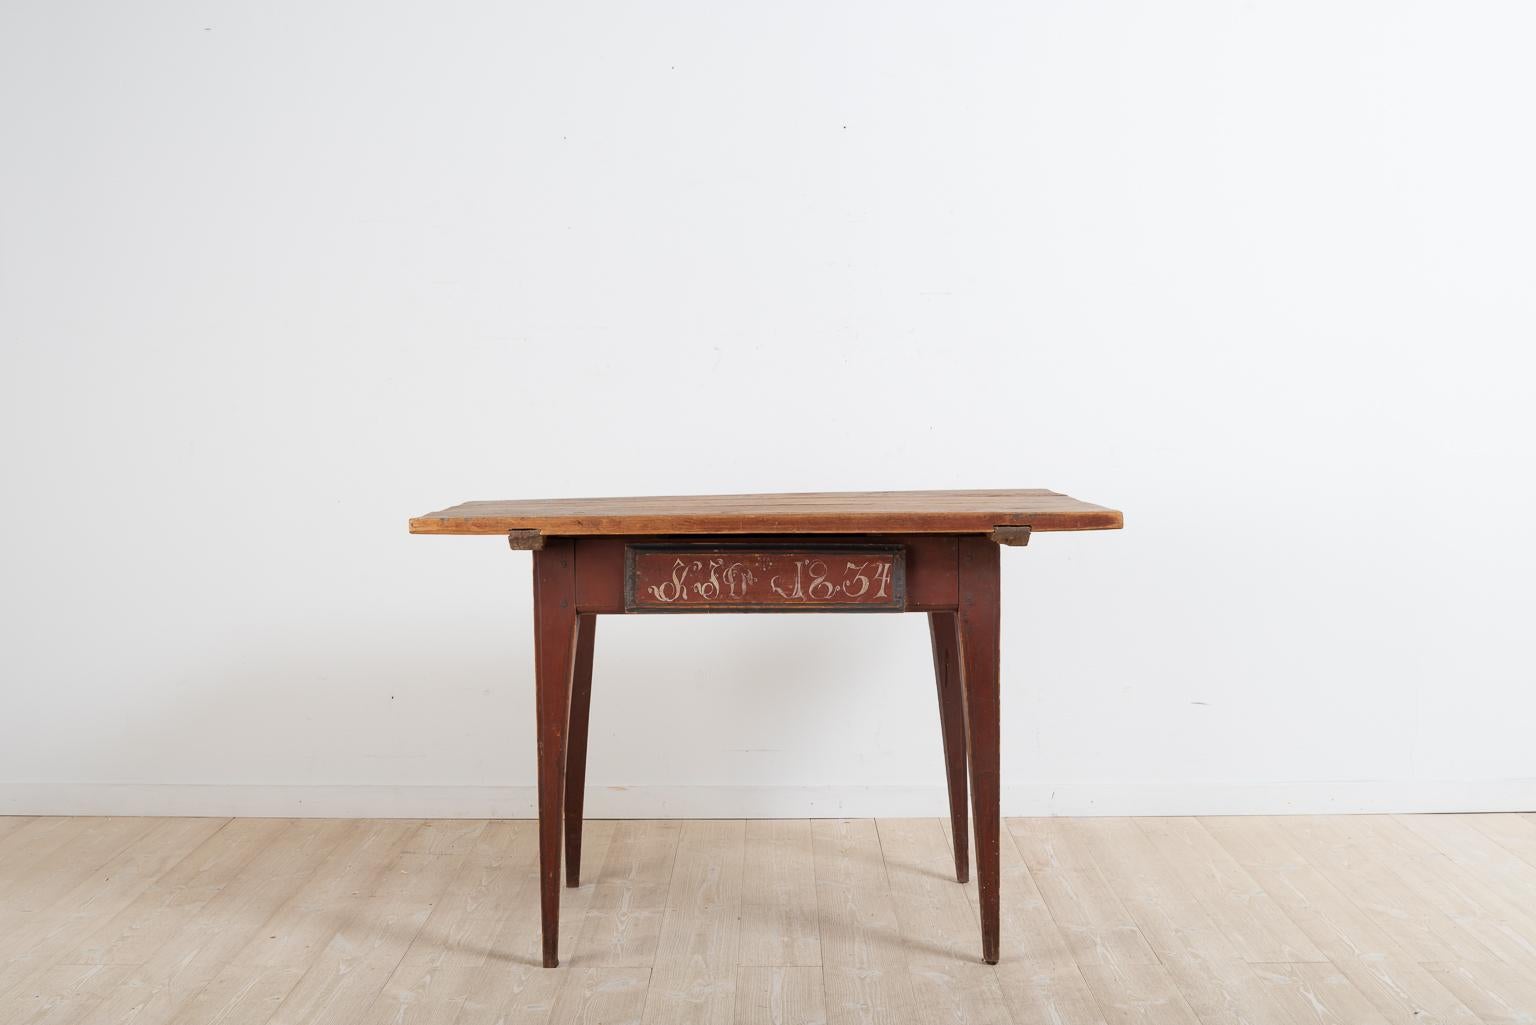 19th century provincial Gustavian table from northern Sweden. The table has straight tapered legs decorated with cannelures. It is in untouched original condition with original untouched paint. The monogram and dating 1834 on the drawer are also